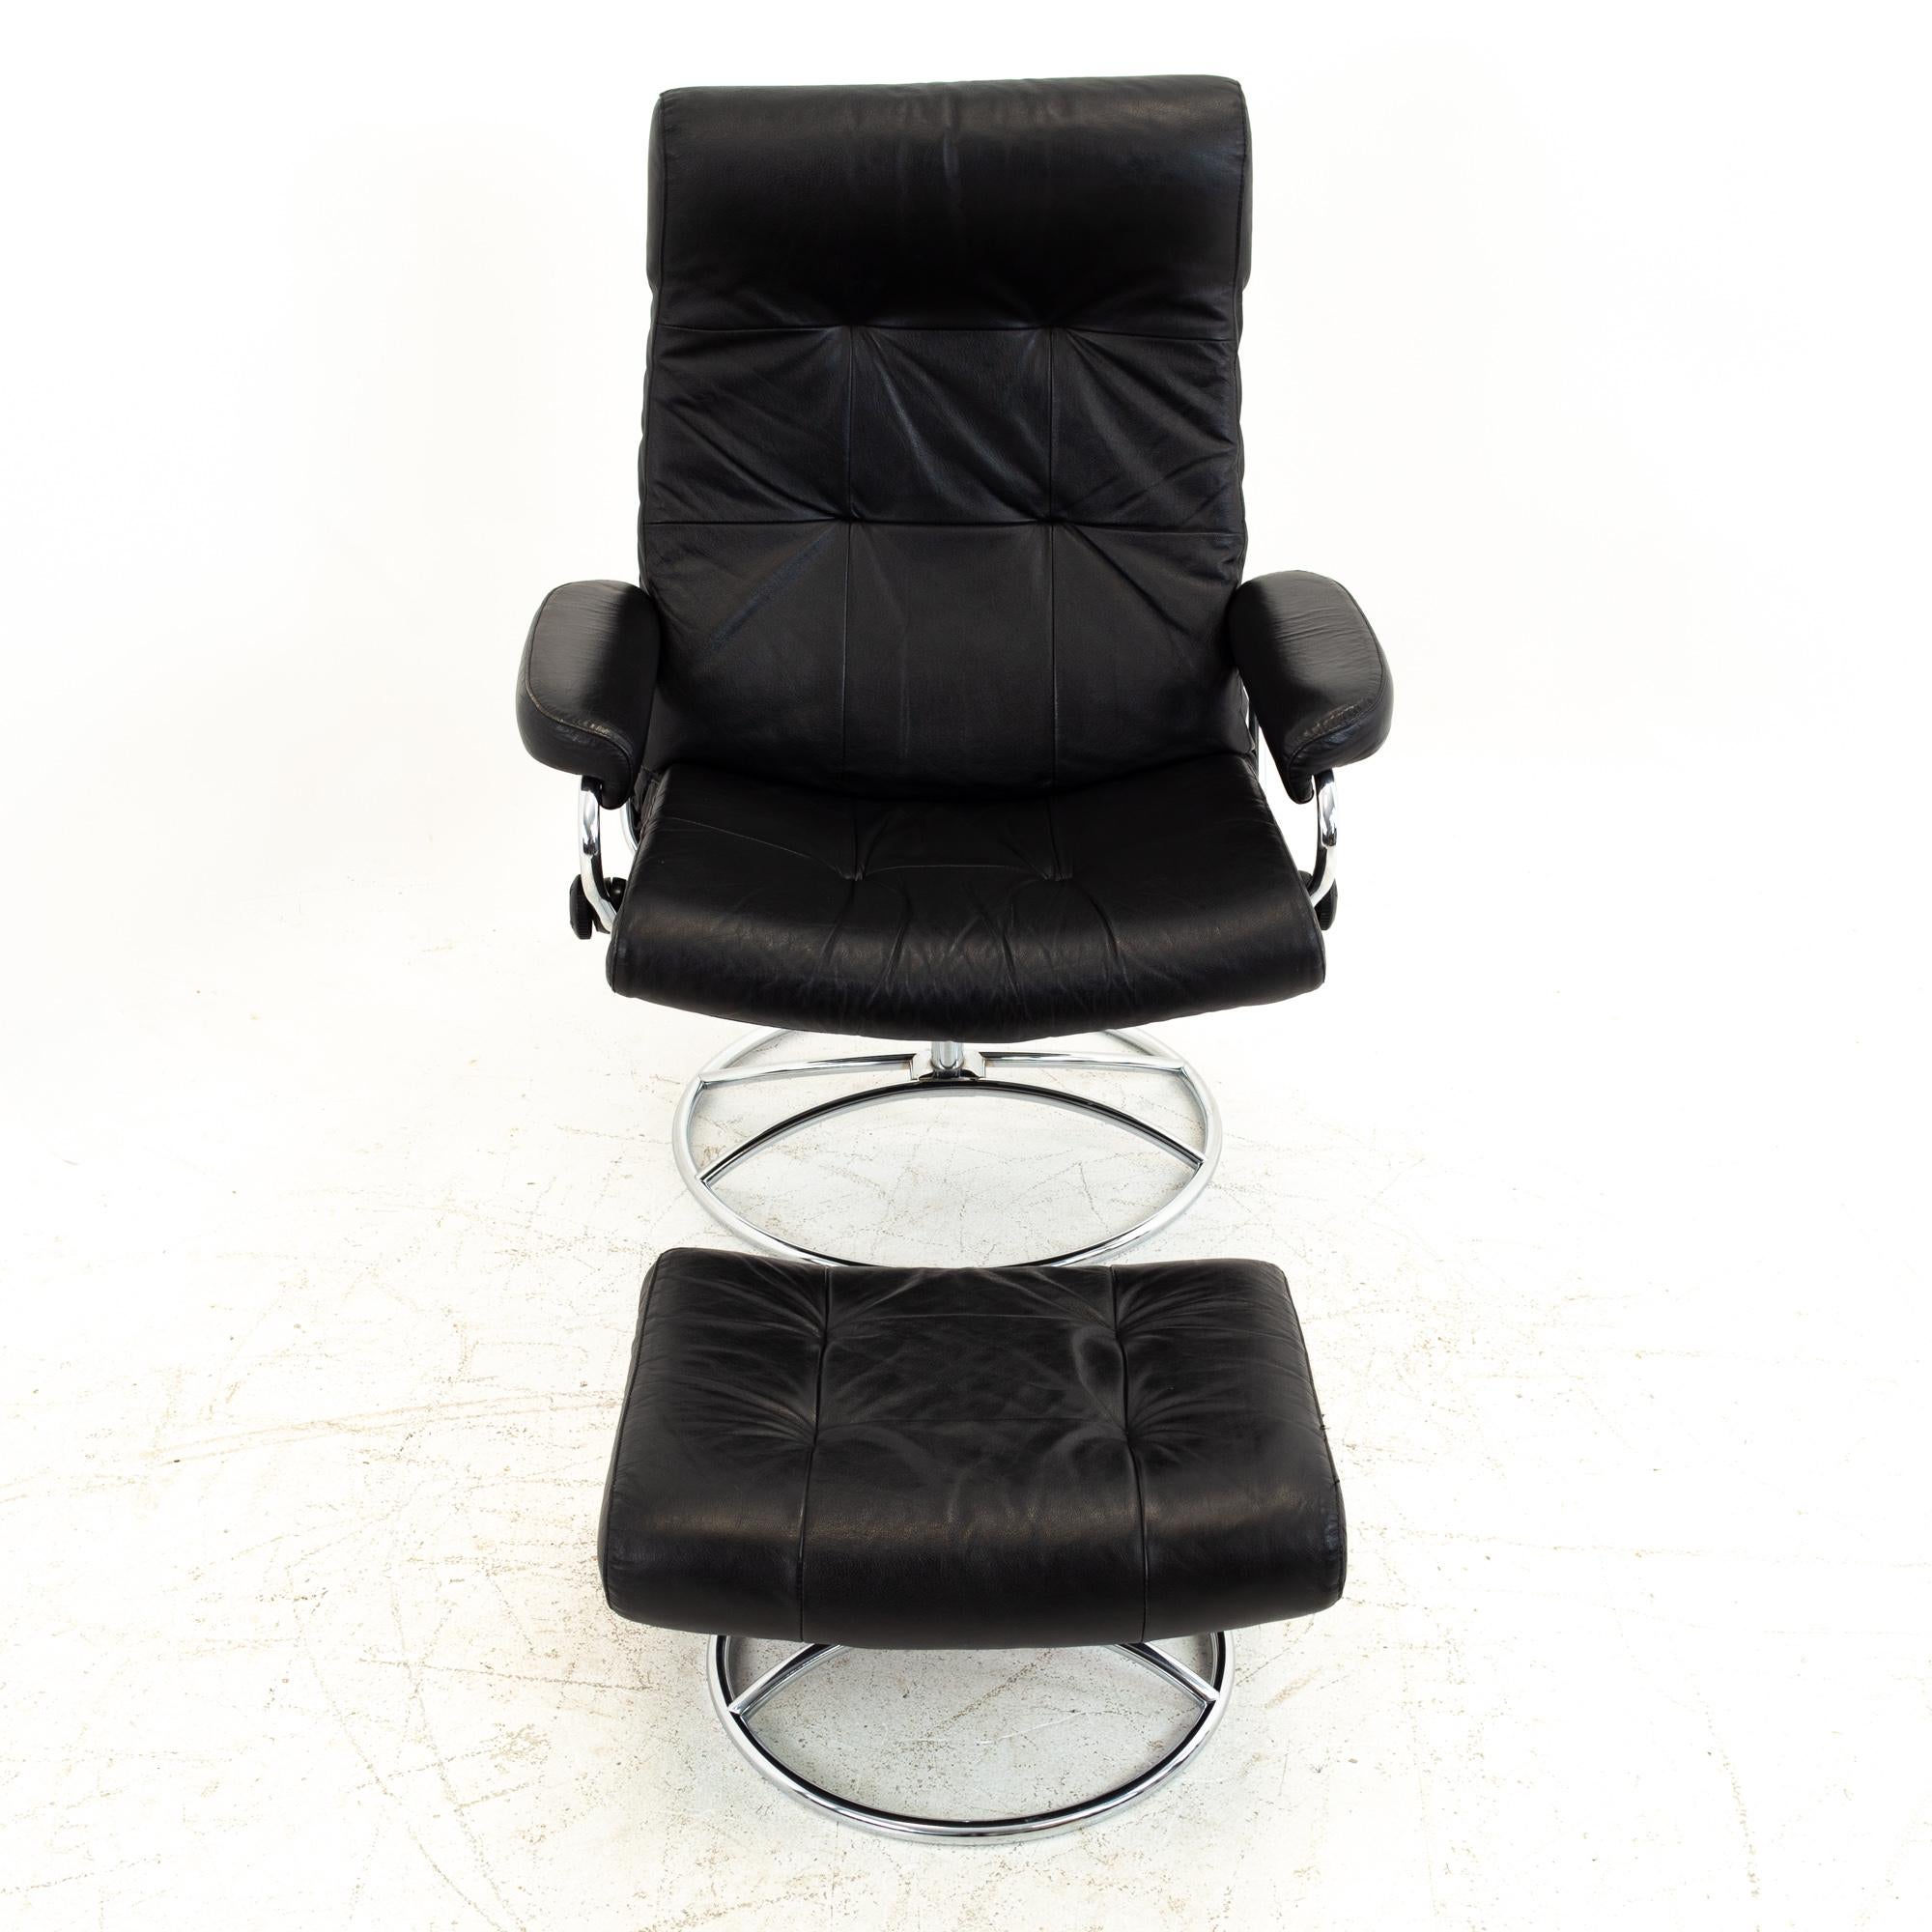 Ekornes Mid Century black and chrome lounge chair and ottoman
Chair measures: 32.5 wide x 27.75 deep x 43 high, with a seat height of 19.75 inches

Each piece of furniture is available in what we call restored vintage condition. Upon purchase it is